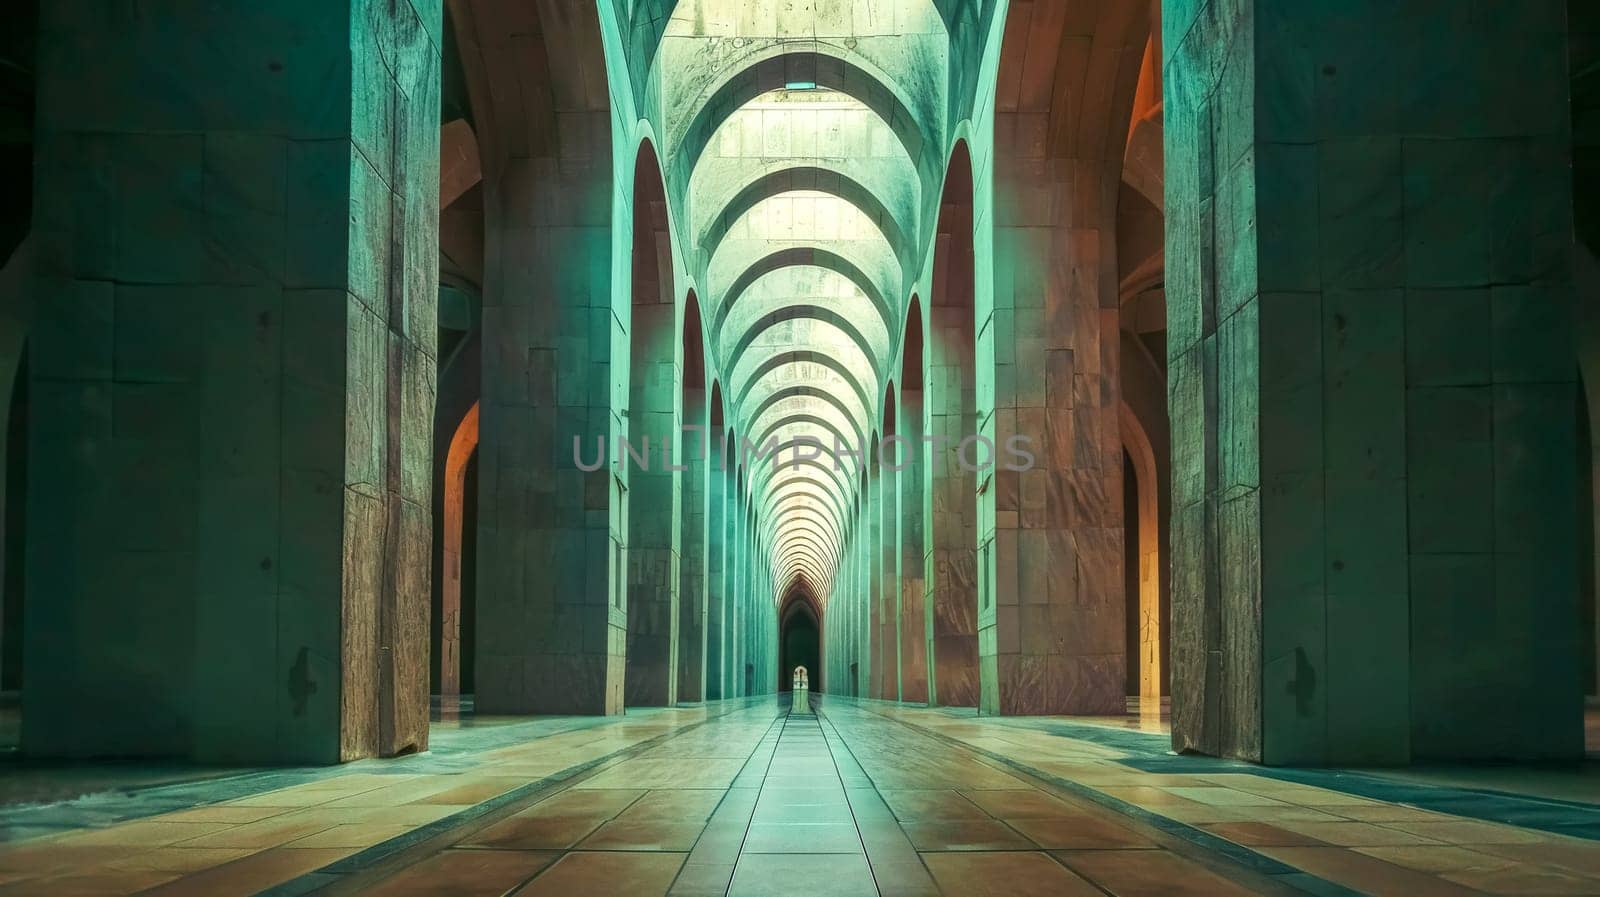 Lone figure stands in the distance of a majestic, symmetrical corridor with arches